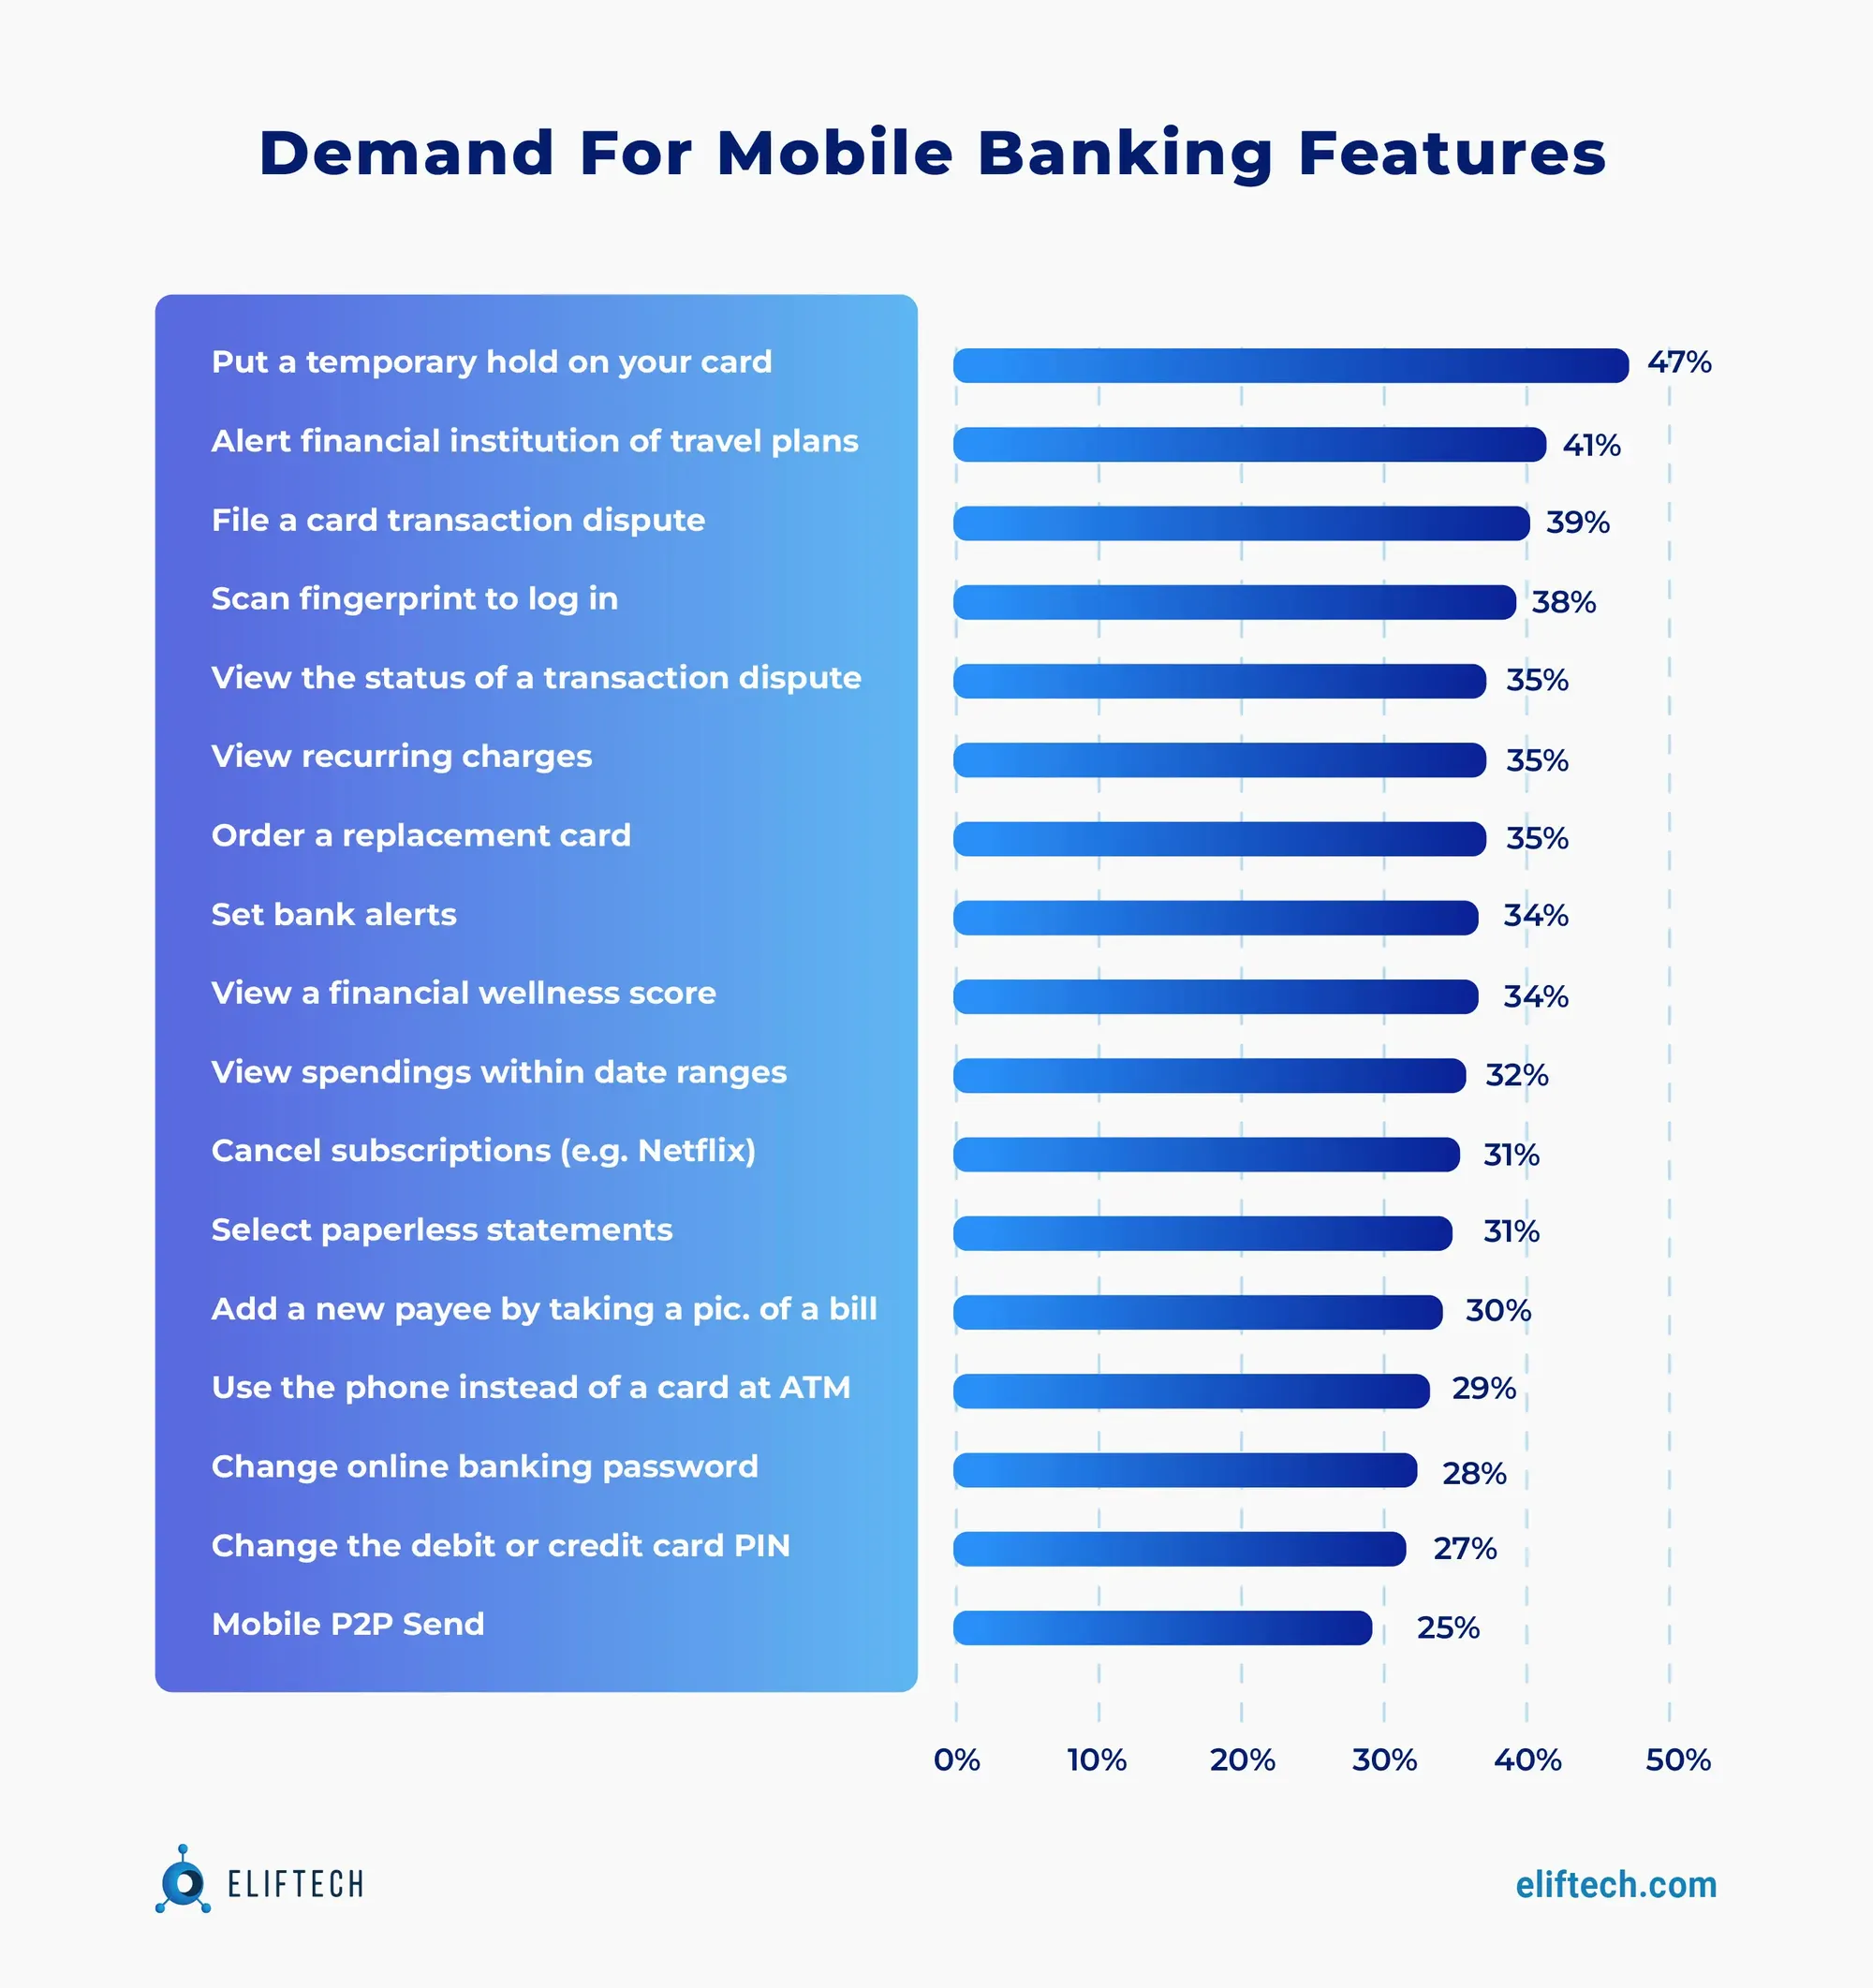 Demand for mobile banking features